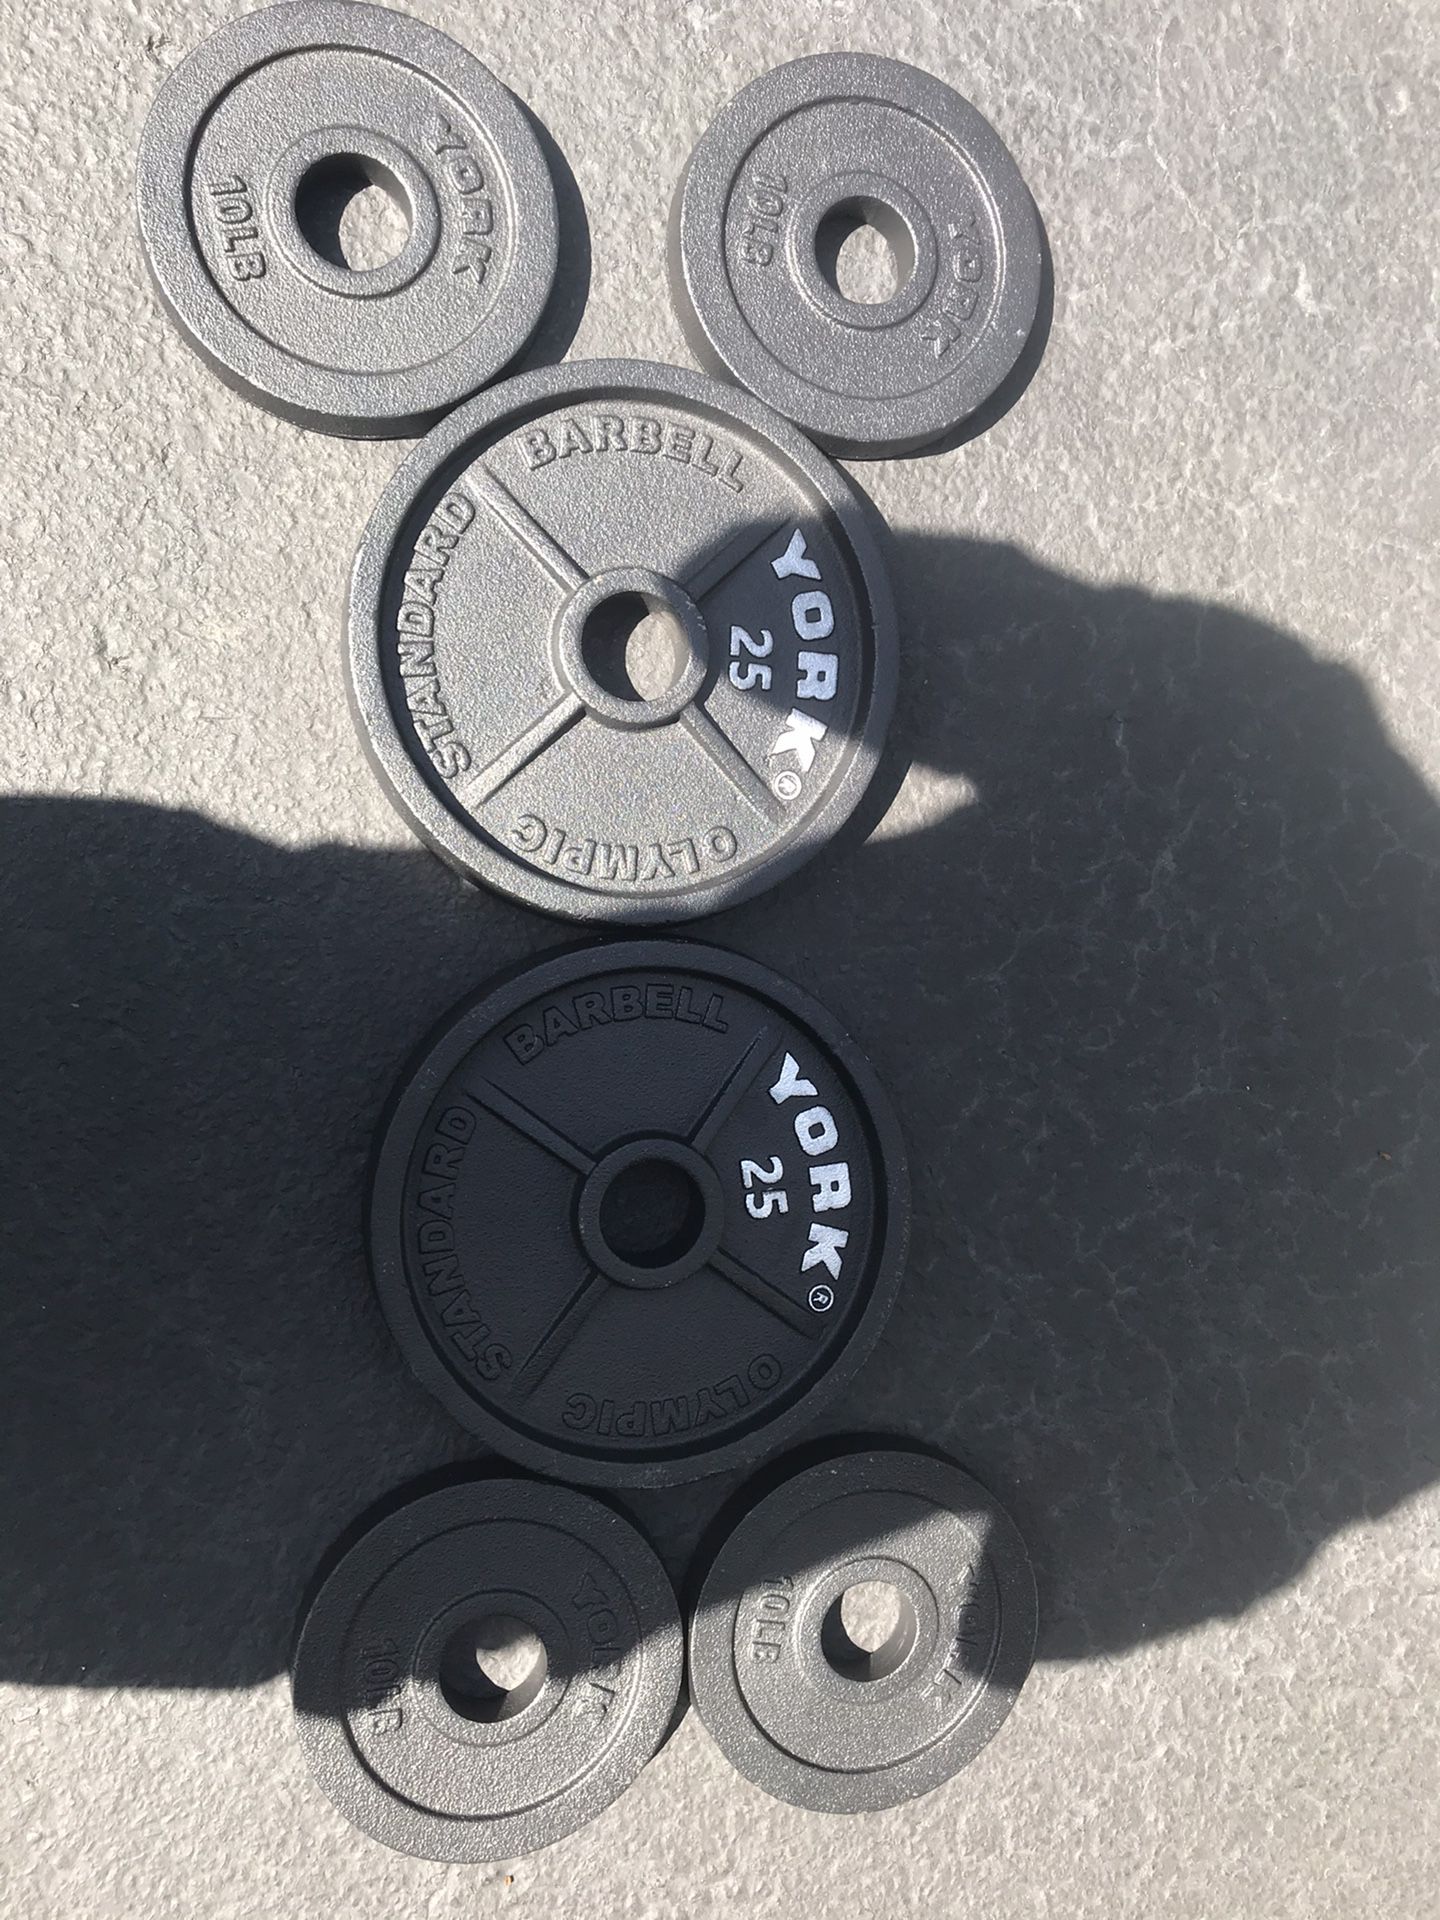 Olympic plates(brand new)